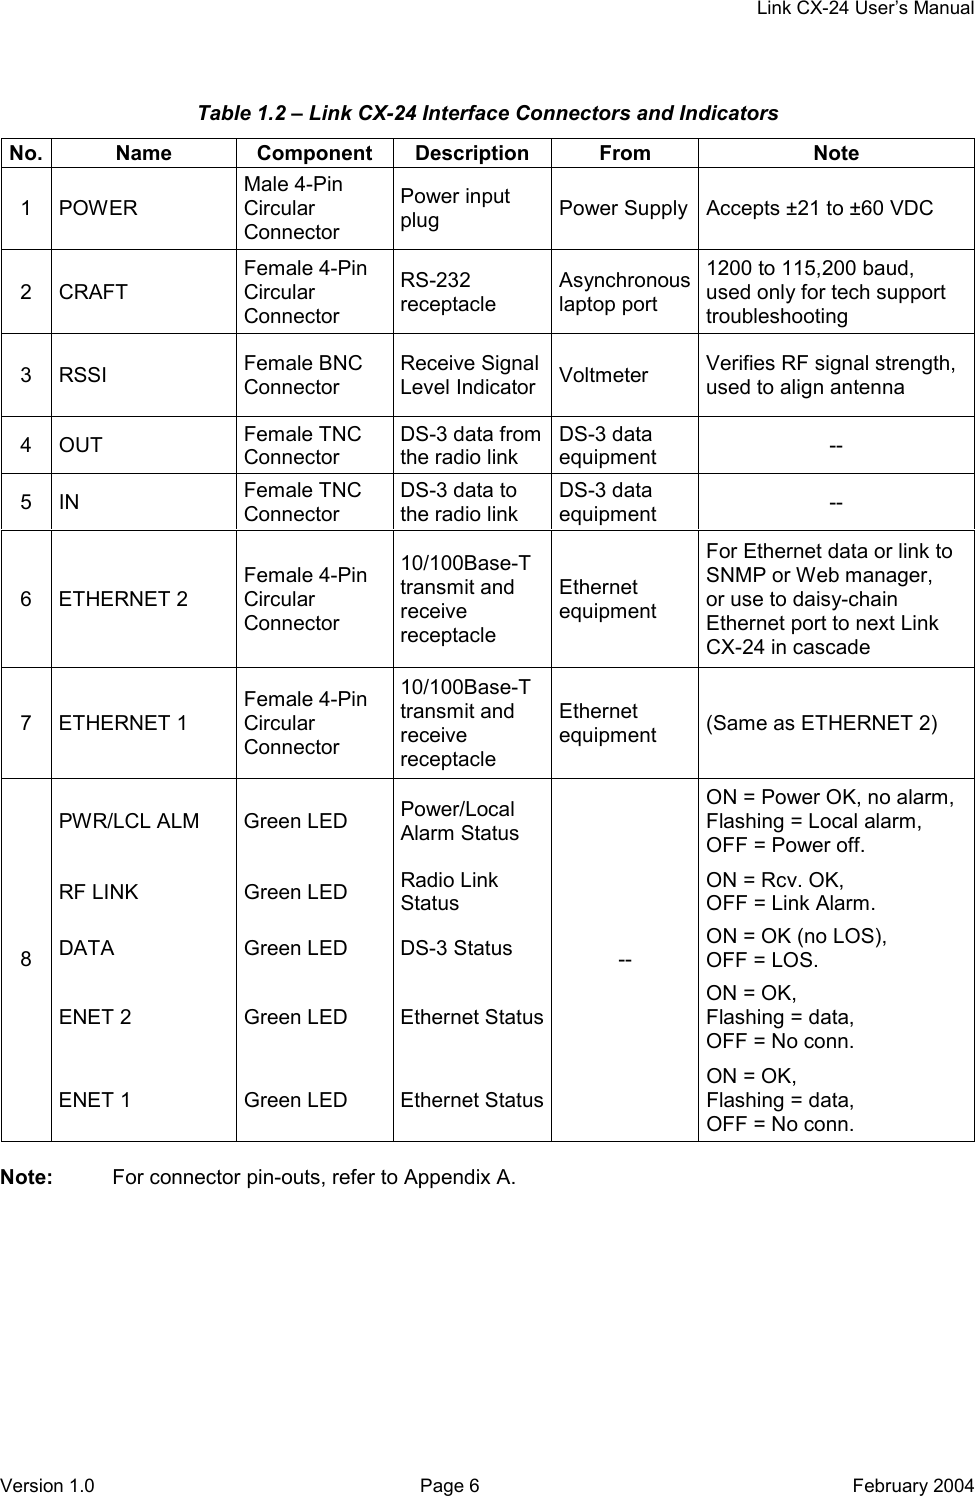     Link CX-24 User’s Manual Version 1.0  Page 6  February 2004 Table 1.2 – Link CX-24 Interface Connectors and Indicators  Note:  For connector pin-outs, refer to Appendix A. No. Name  Component Description From  Note 1 POWER Male 4-Pin Circular Connector Power input plug  Power Supply Accepts ±21 to ±60 VDC 2 CRAFT Female 4-Pin Circular Connector RS-232 receptacle Asynchronous laptop port 1200 to 115,200 baud, used only for tech support troubleshooting 3 RSSI  Female BNC Connector Receive Signal Level Indicator  Voltmeter  Verifies RF signal strength, used to align antenna 4 OUT  Female TNC Connector DS-3 data from the radio link DS-3 data equipment  -- 5 IN  Female TNC Connector DS-3 data to the radio link DS-3 data equipment  -- 6 ETHERNET 2 Female 4-Pin Circular Connector 10/100Base-T transmit and receive receptacle Ethernet equipment For Ethernet data or link to SNMP or Web manager, or use to daisy-chain Ethernet port to next Link CX-24 in cascade 7 ETHERNET 1 Female 4-Pin Circular Connector 10/100Base-T transmit and receive receptacle Ethernet equipment  (Same as ETHERNET 2) PWR/LCL ALM  Green LED  Power/Local Alarm Status ON = Power OK, no alarm, Flashing = Local alarm, OFF = Power off. RF LINK  Green LED  Radio Link Status ON = Rcv. OK, OFF = Link Alarm. DATA Green LED DS-3 Status  ON = OK (no LOS), OFF = LOS. ENET 2  Green LED  Ethernet StatusON = OK, Flashing = data, OFF = No conn. 8 ENET 1  Green LED  Ethernet Status-- ON = OK, Flashing = data, OFF = No conn. 